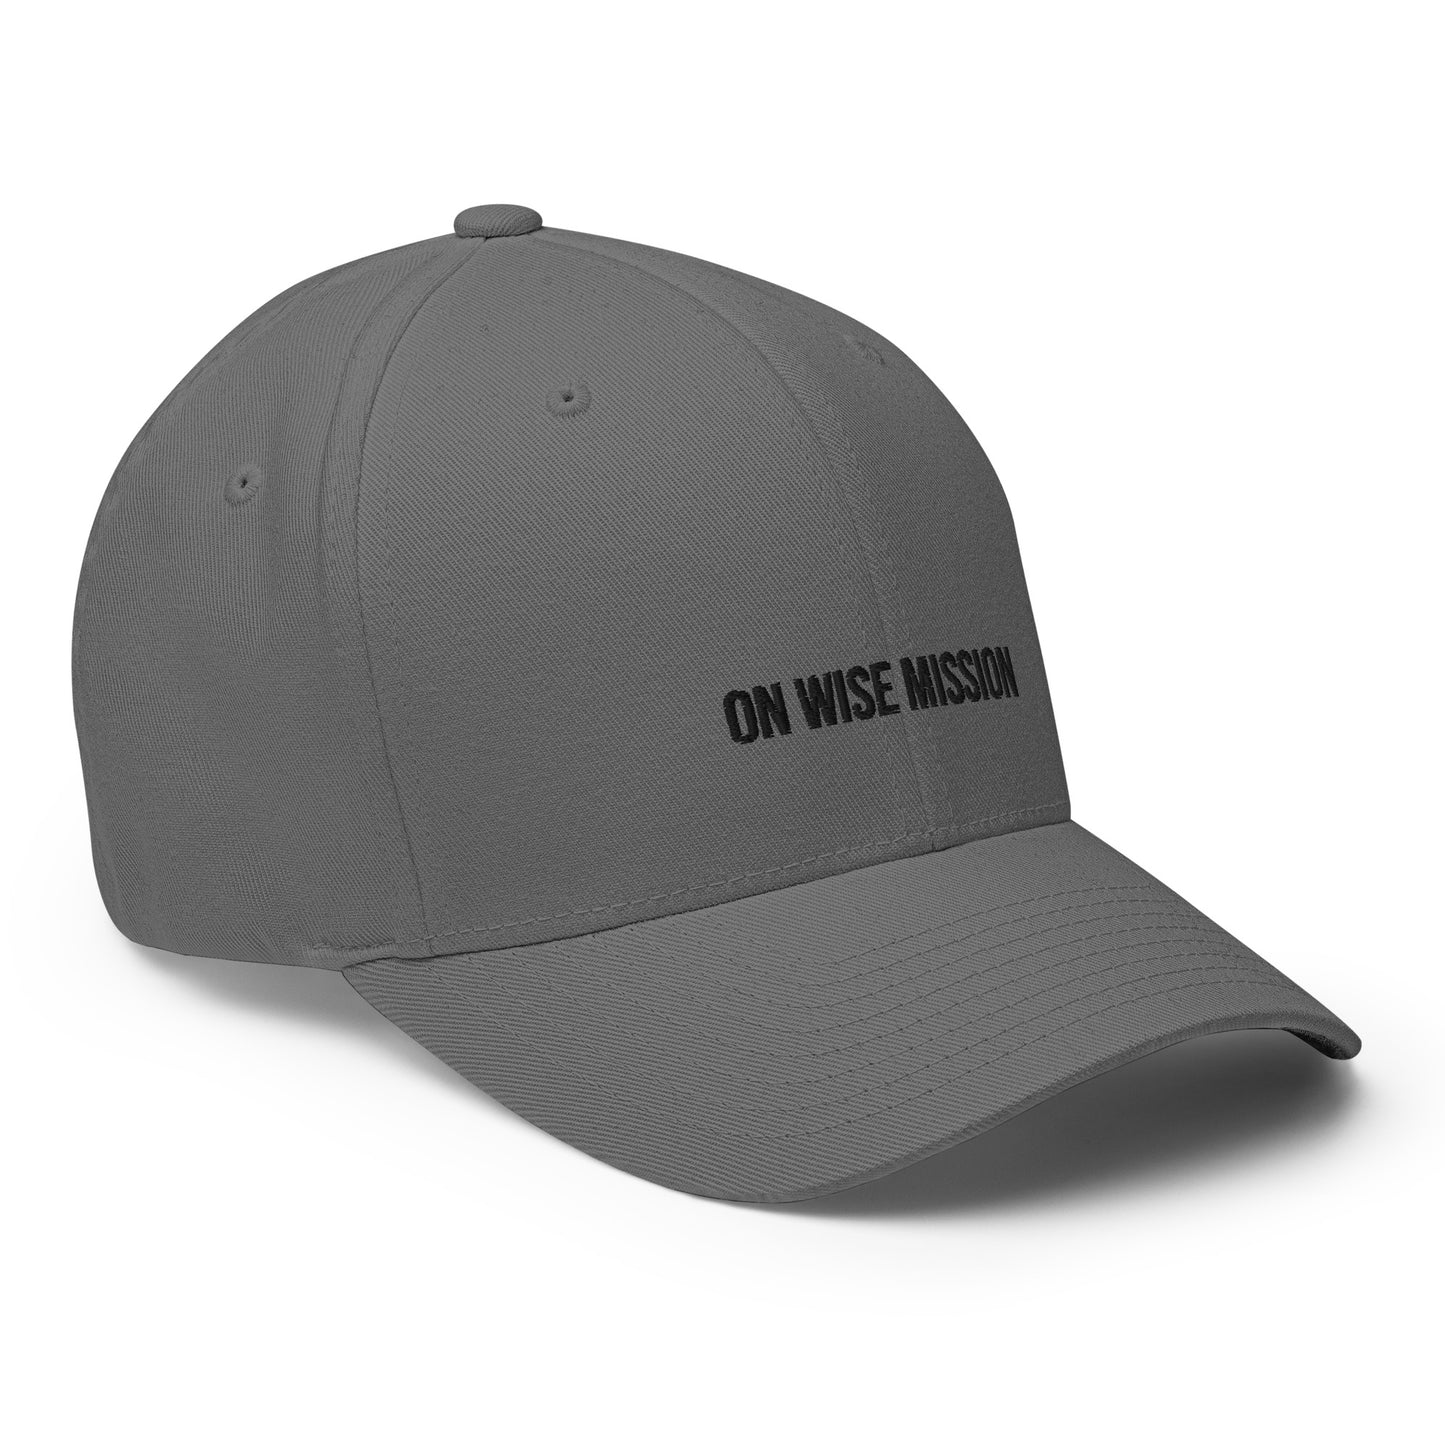 Cap "ON WISE MISSION"